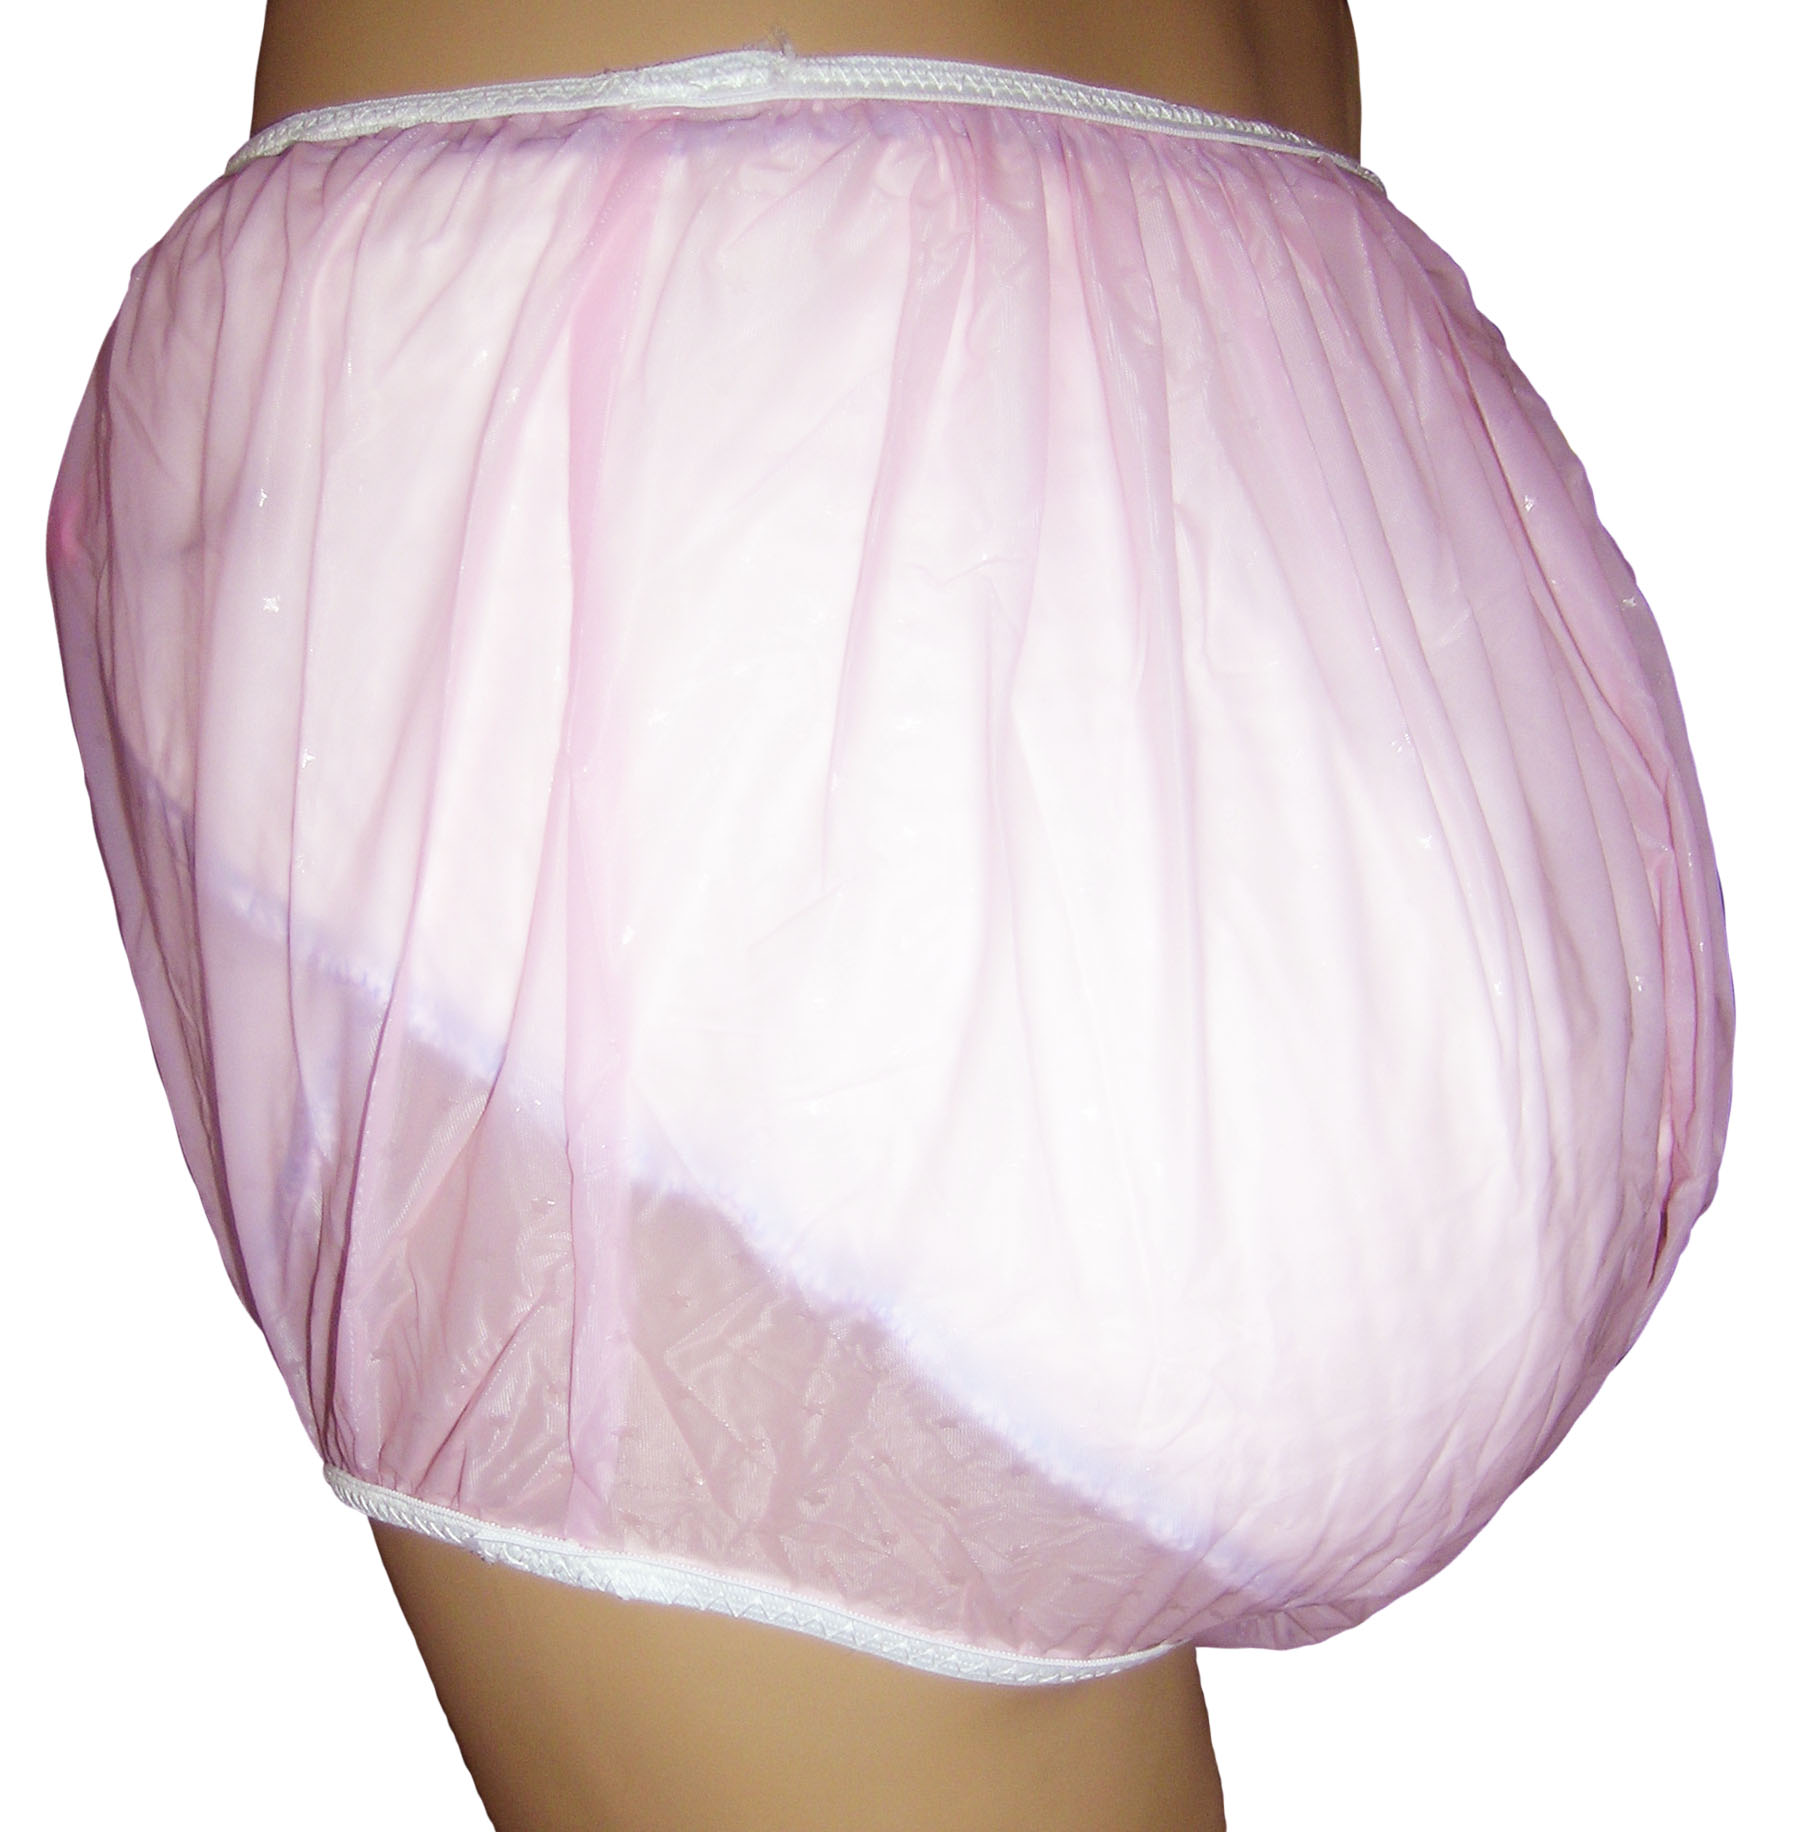 Adult Diaper and Plastic Pant Assurance Old Women Nappy